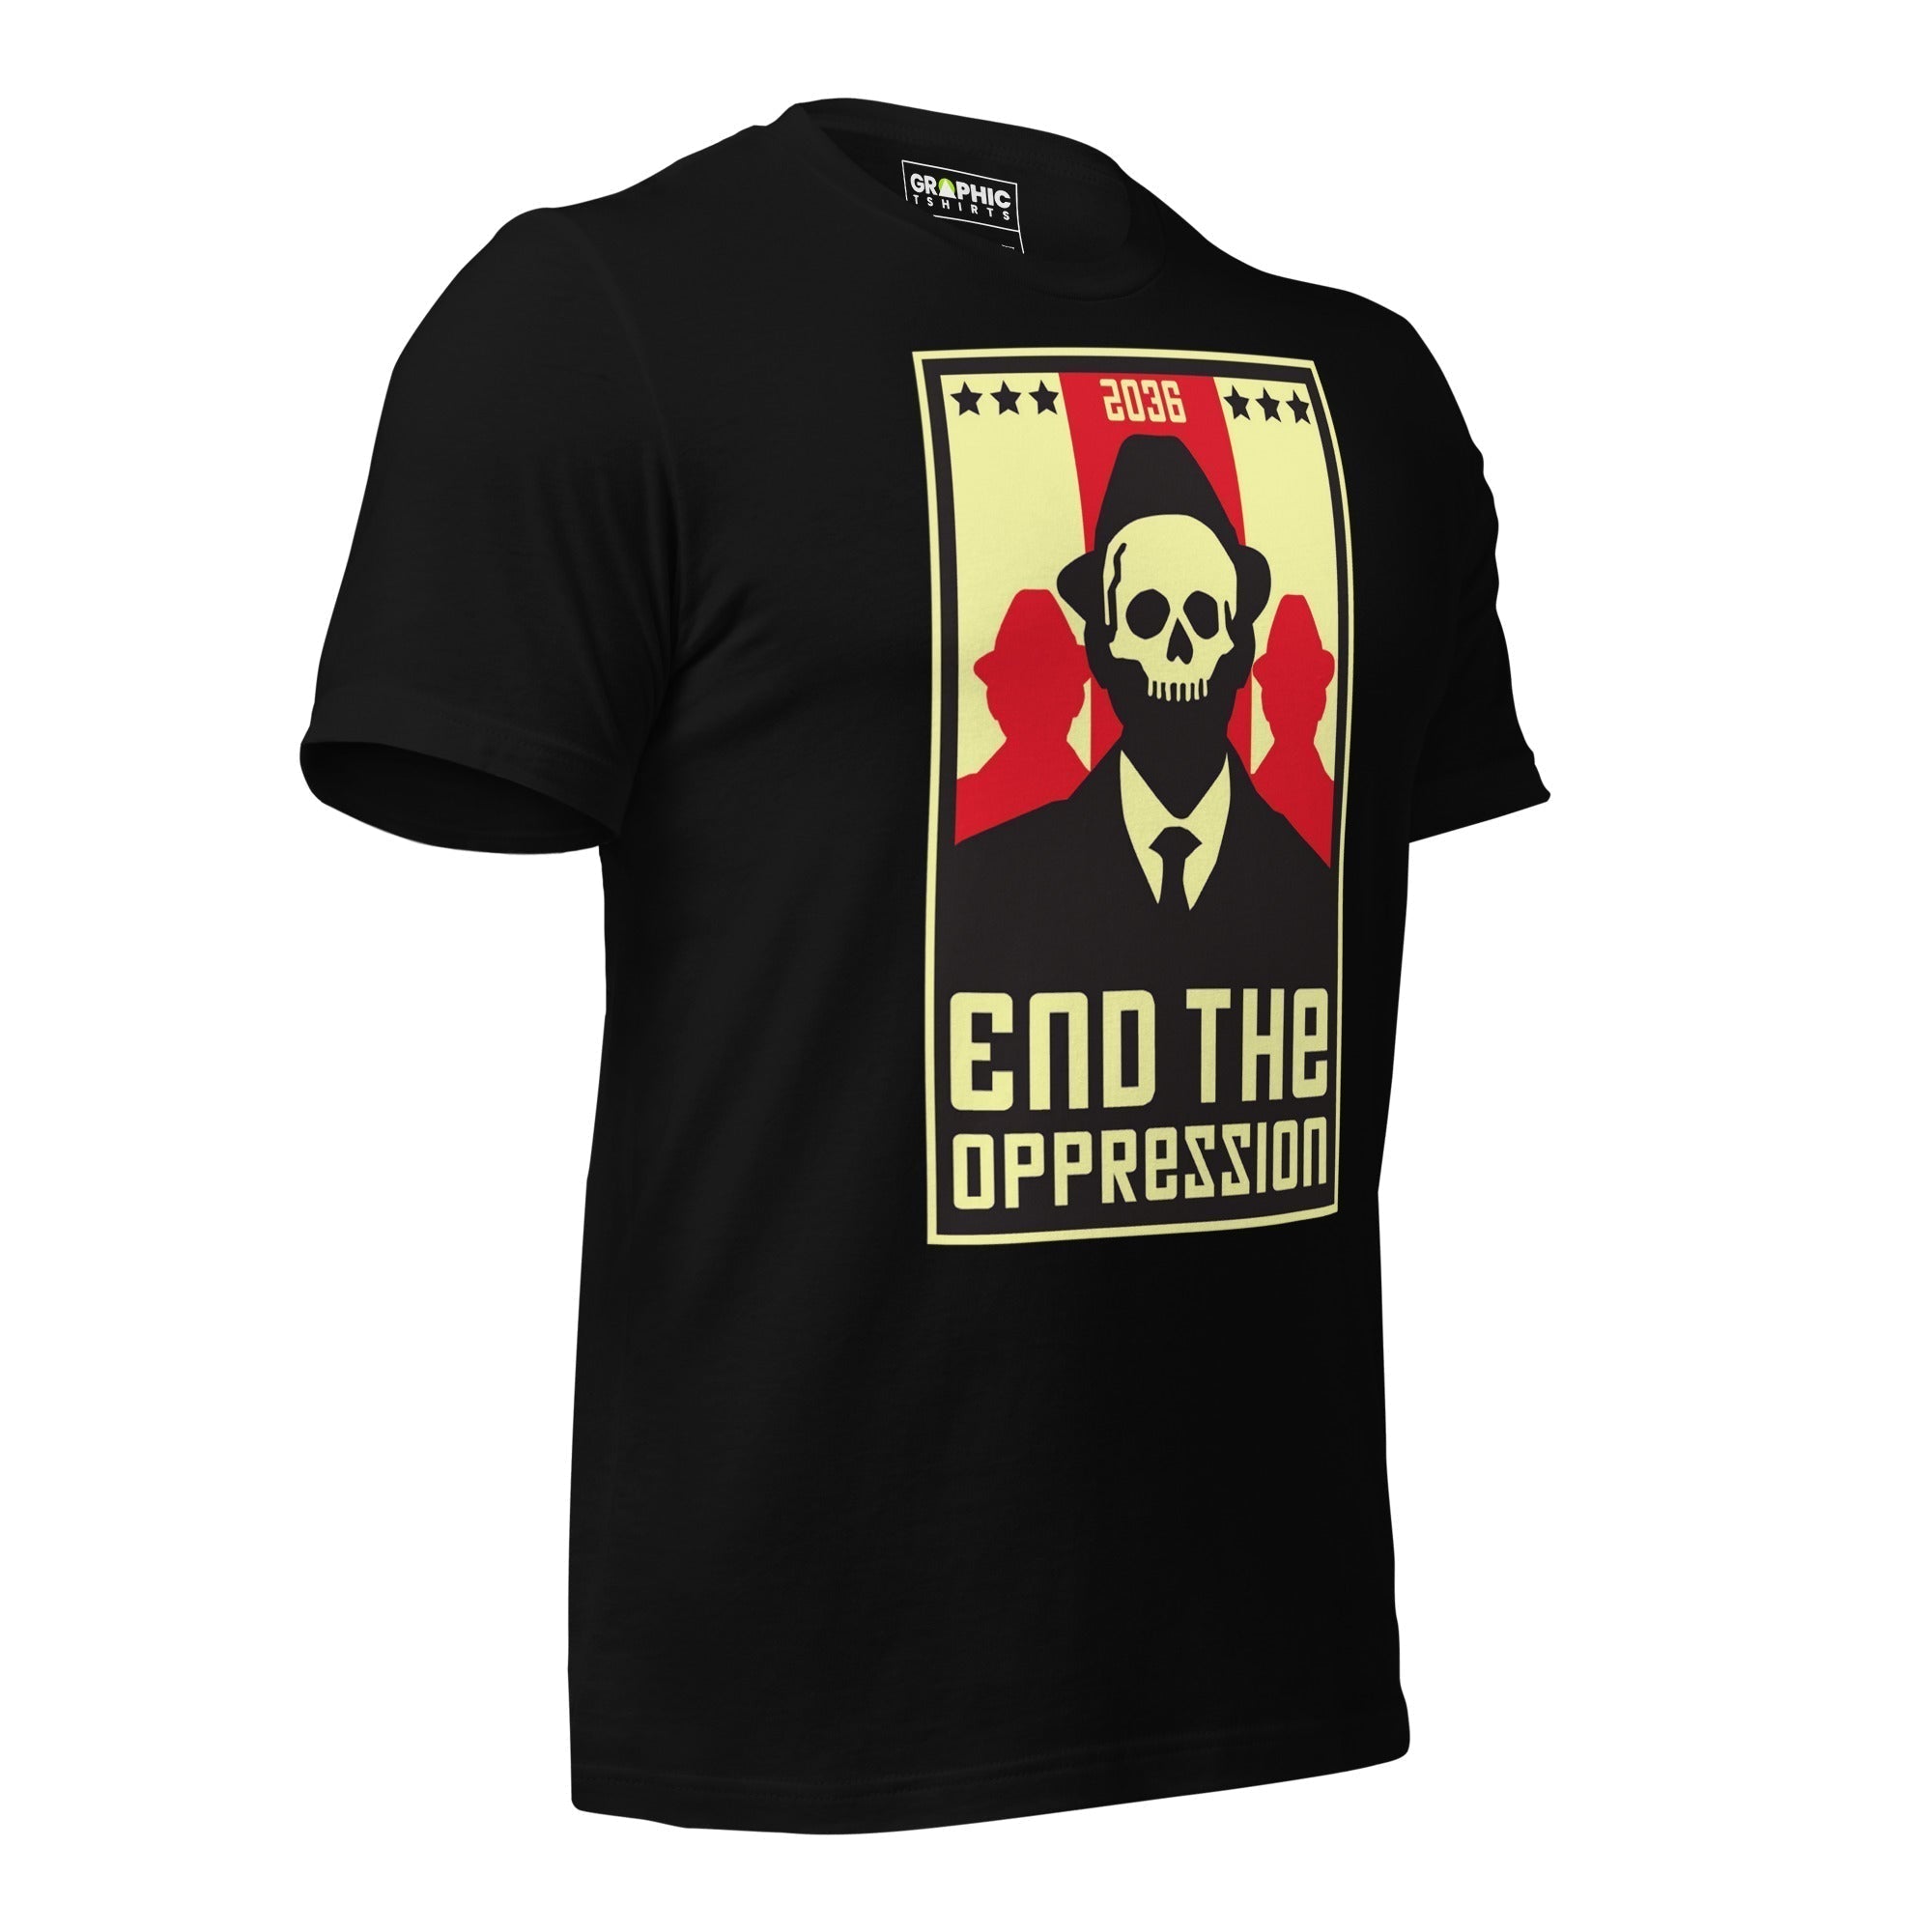 Unisex Staple T-Shirt - End The Oppression - GRAPHIC T-SHIRTS